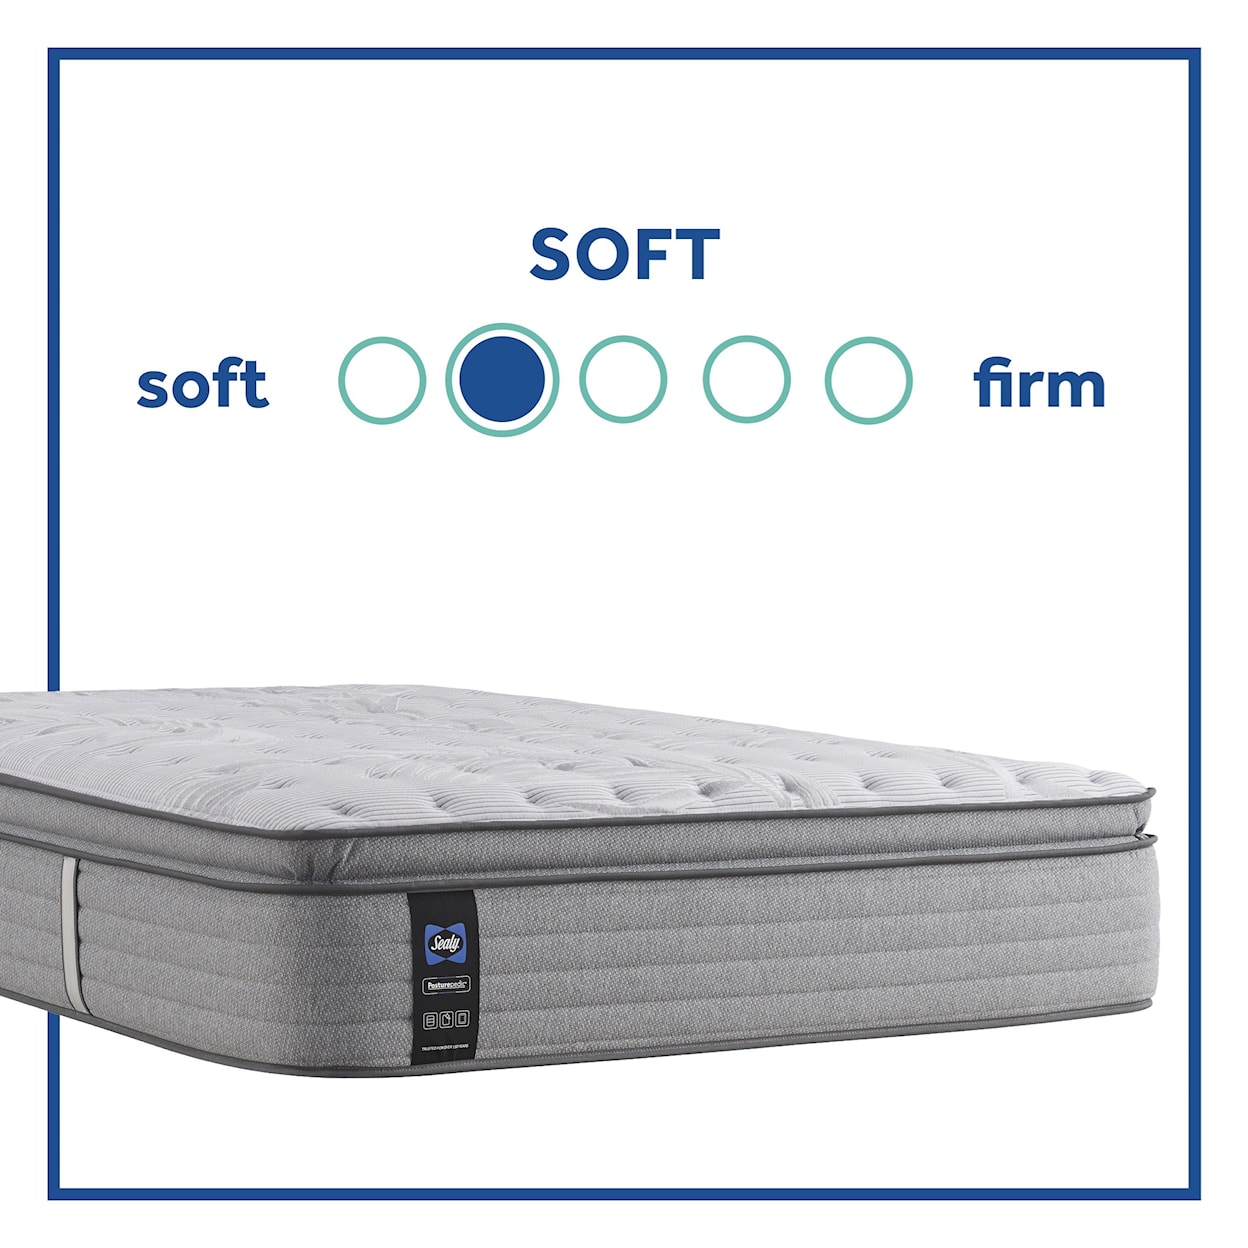 Sealy PPS5 Posturpedic Innerspring Soft EPT Full 15" Soft Euro Pillow Top Set